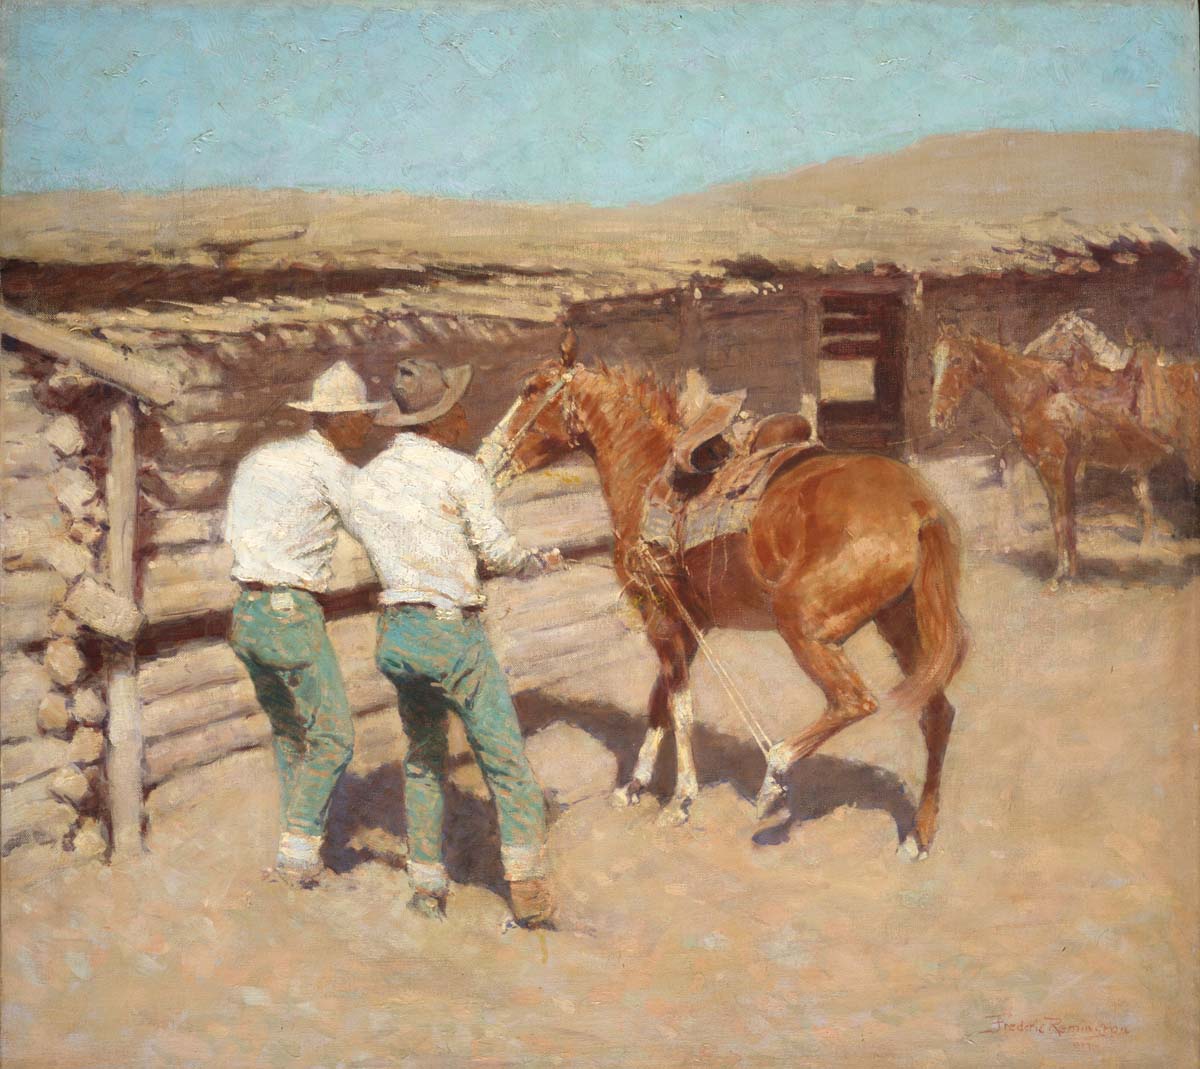 Frederic Remington (1861-1909). "The War Bridle," 1909. Oil on canvas, 27 x 30 inches. Gift in memory of A. Barton Hepburn and Cordelia H. Cushman. 8.12